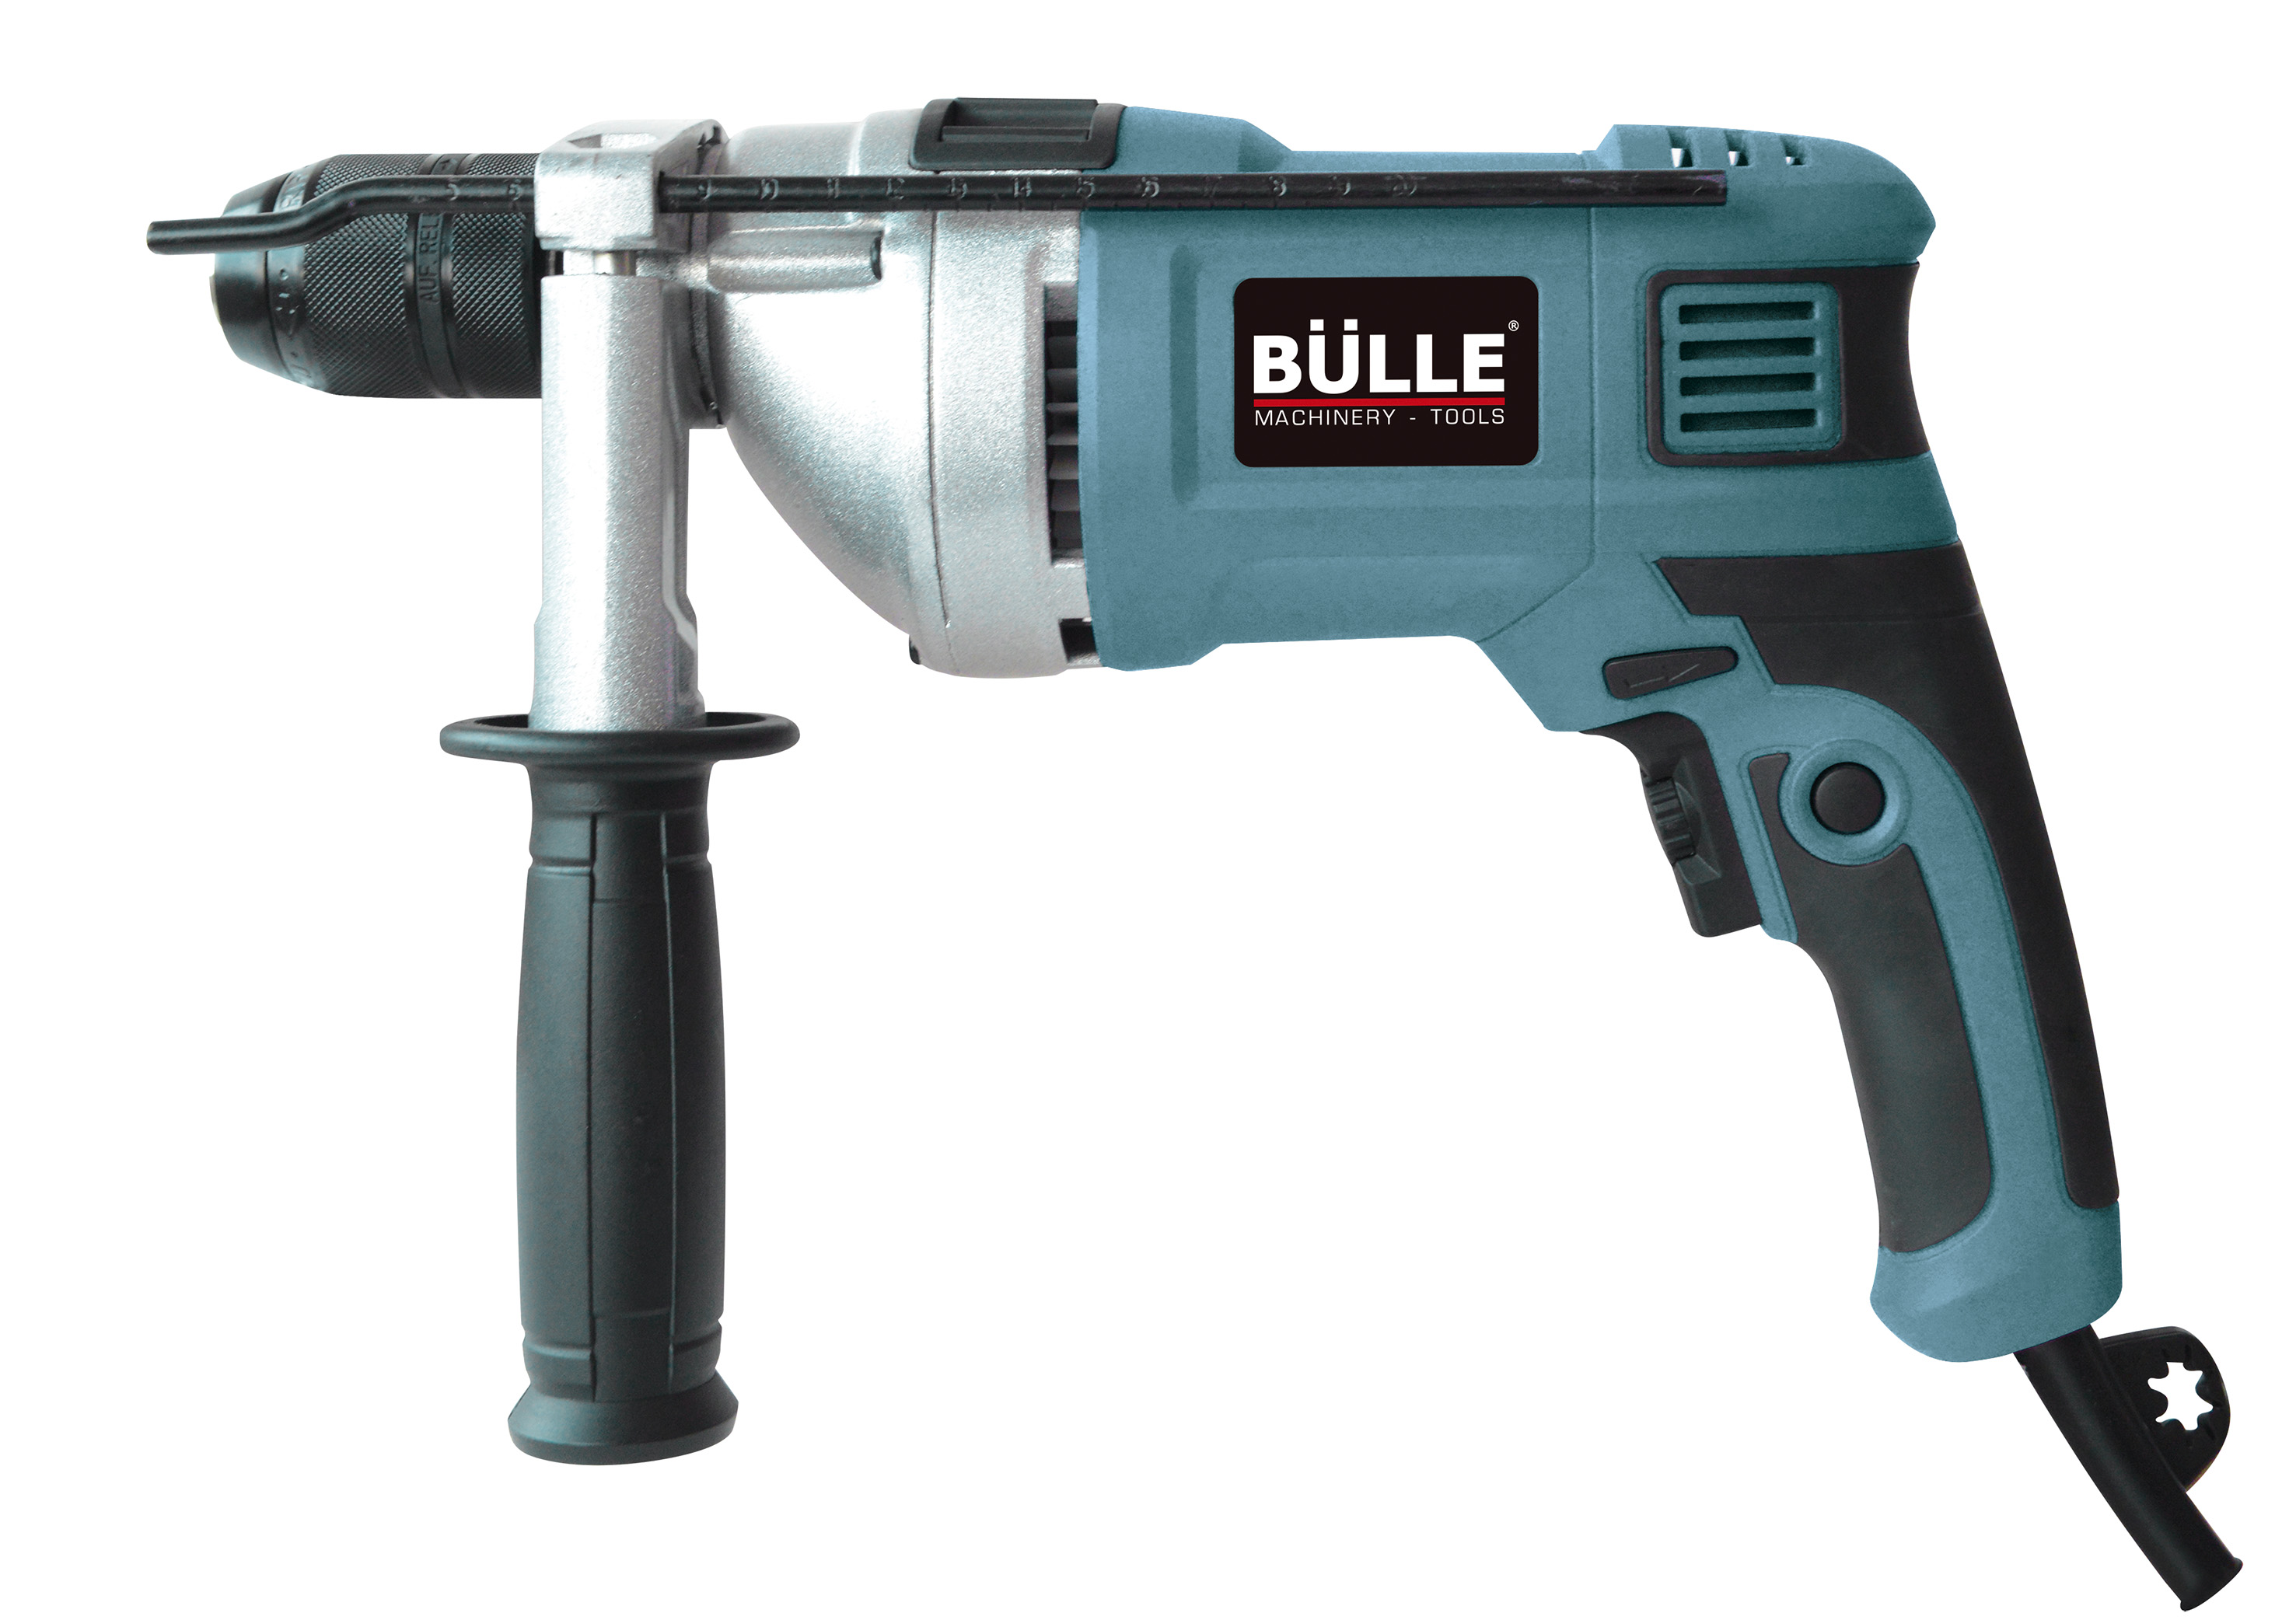 Electric Combi Drill 850W Bulle